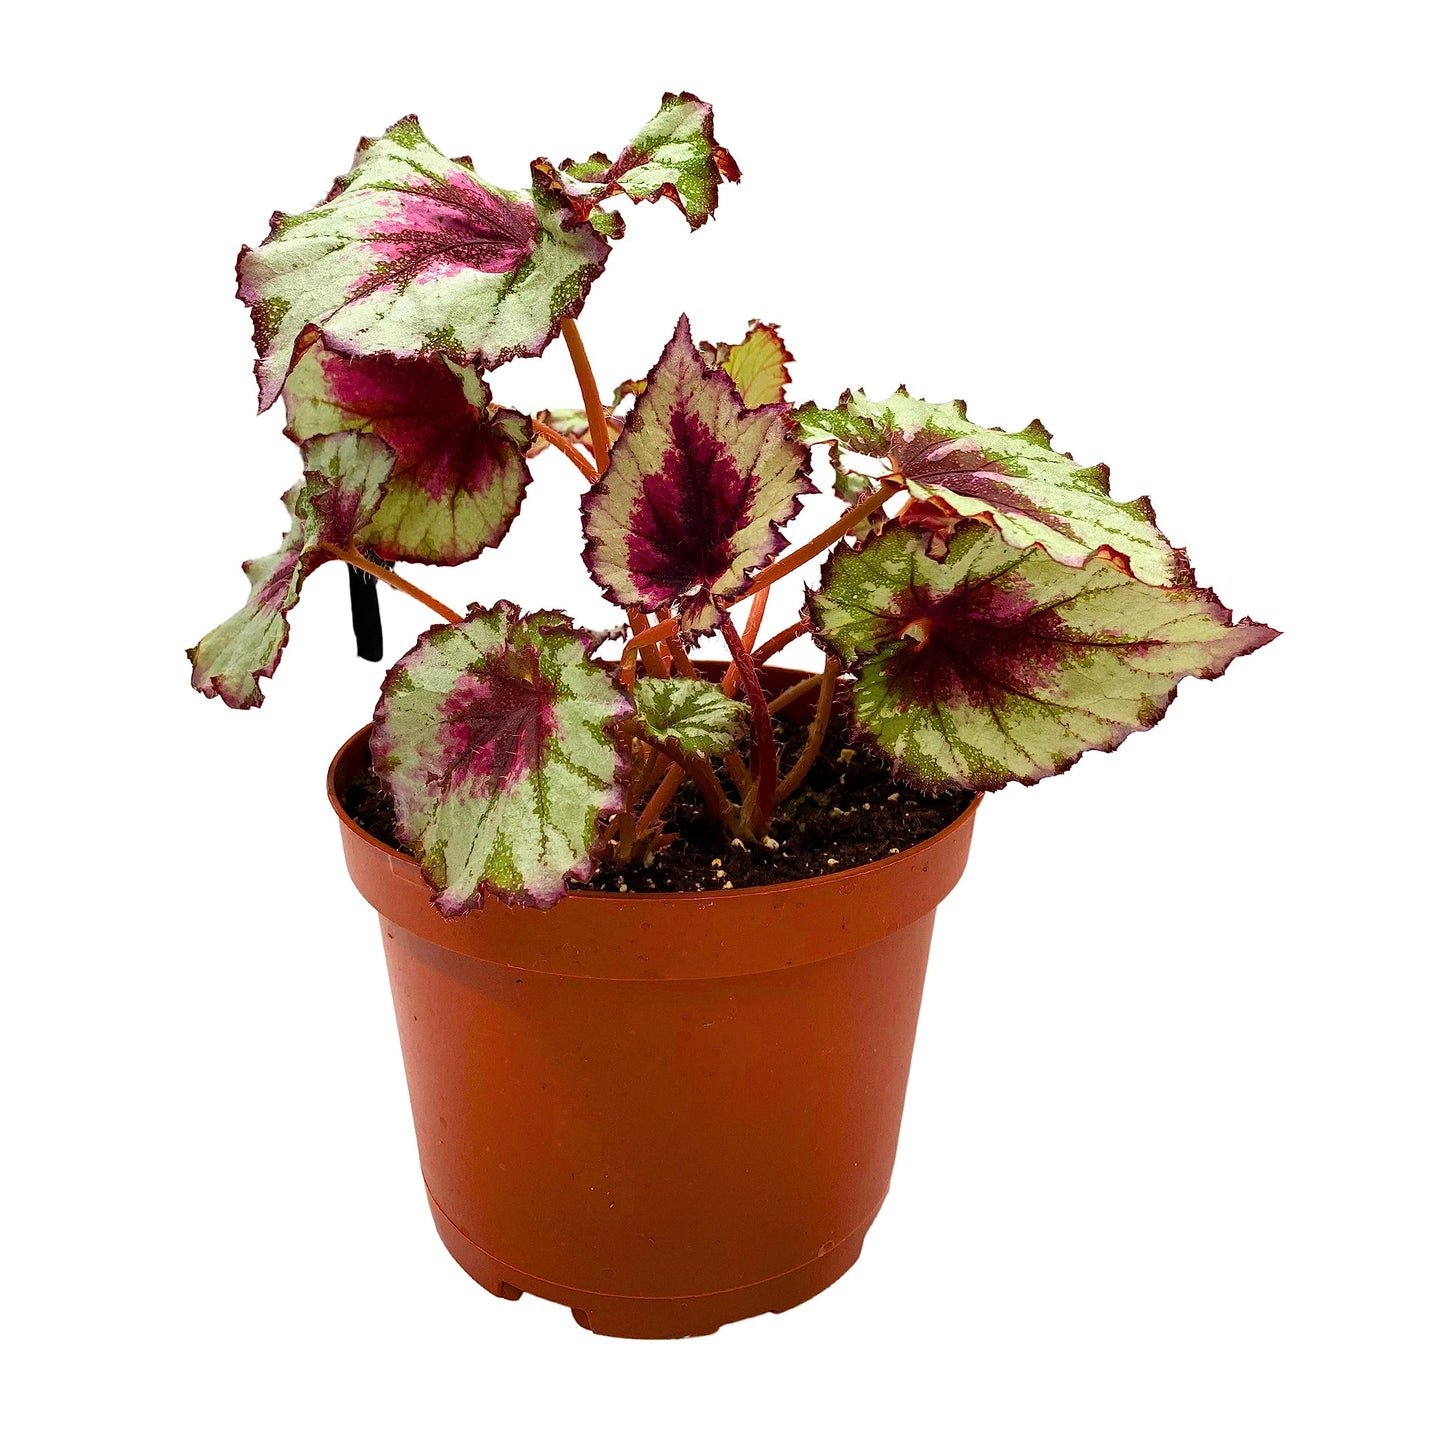 Harmony's BubbleBlooms Peppermint Twist Begonia, Red and White Spiral Leaf, Begonia Rex in 6 inch Pot